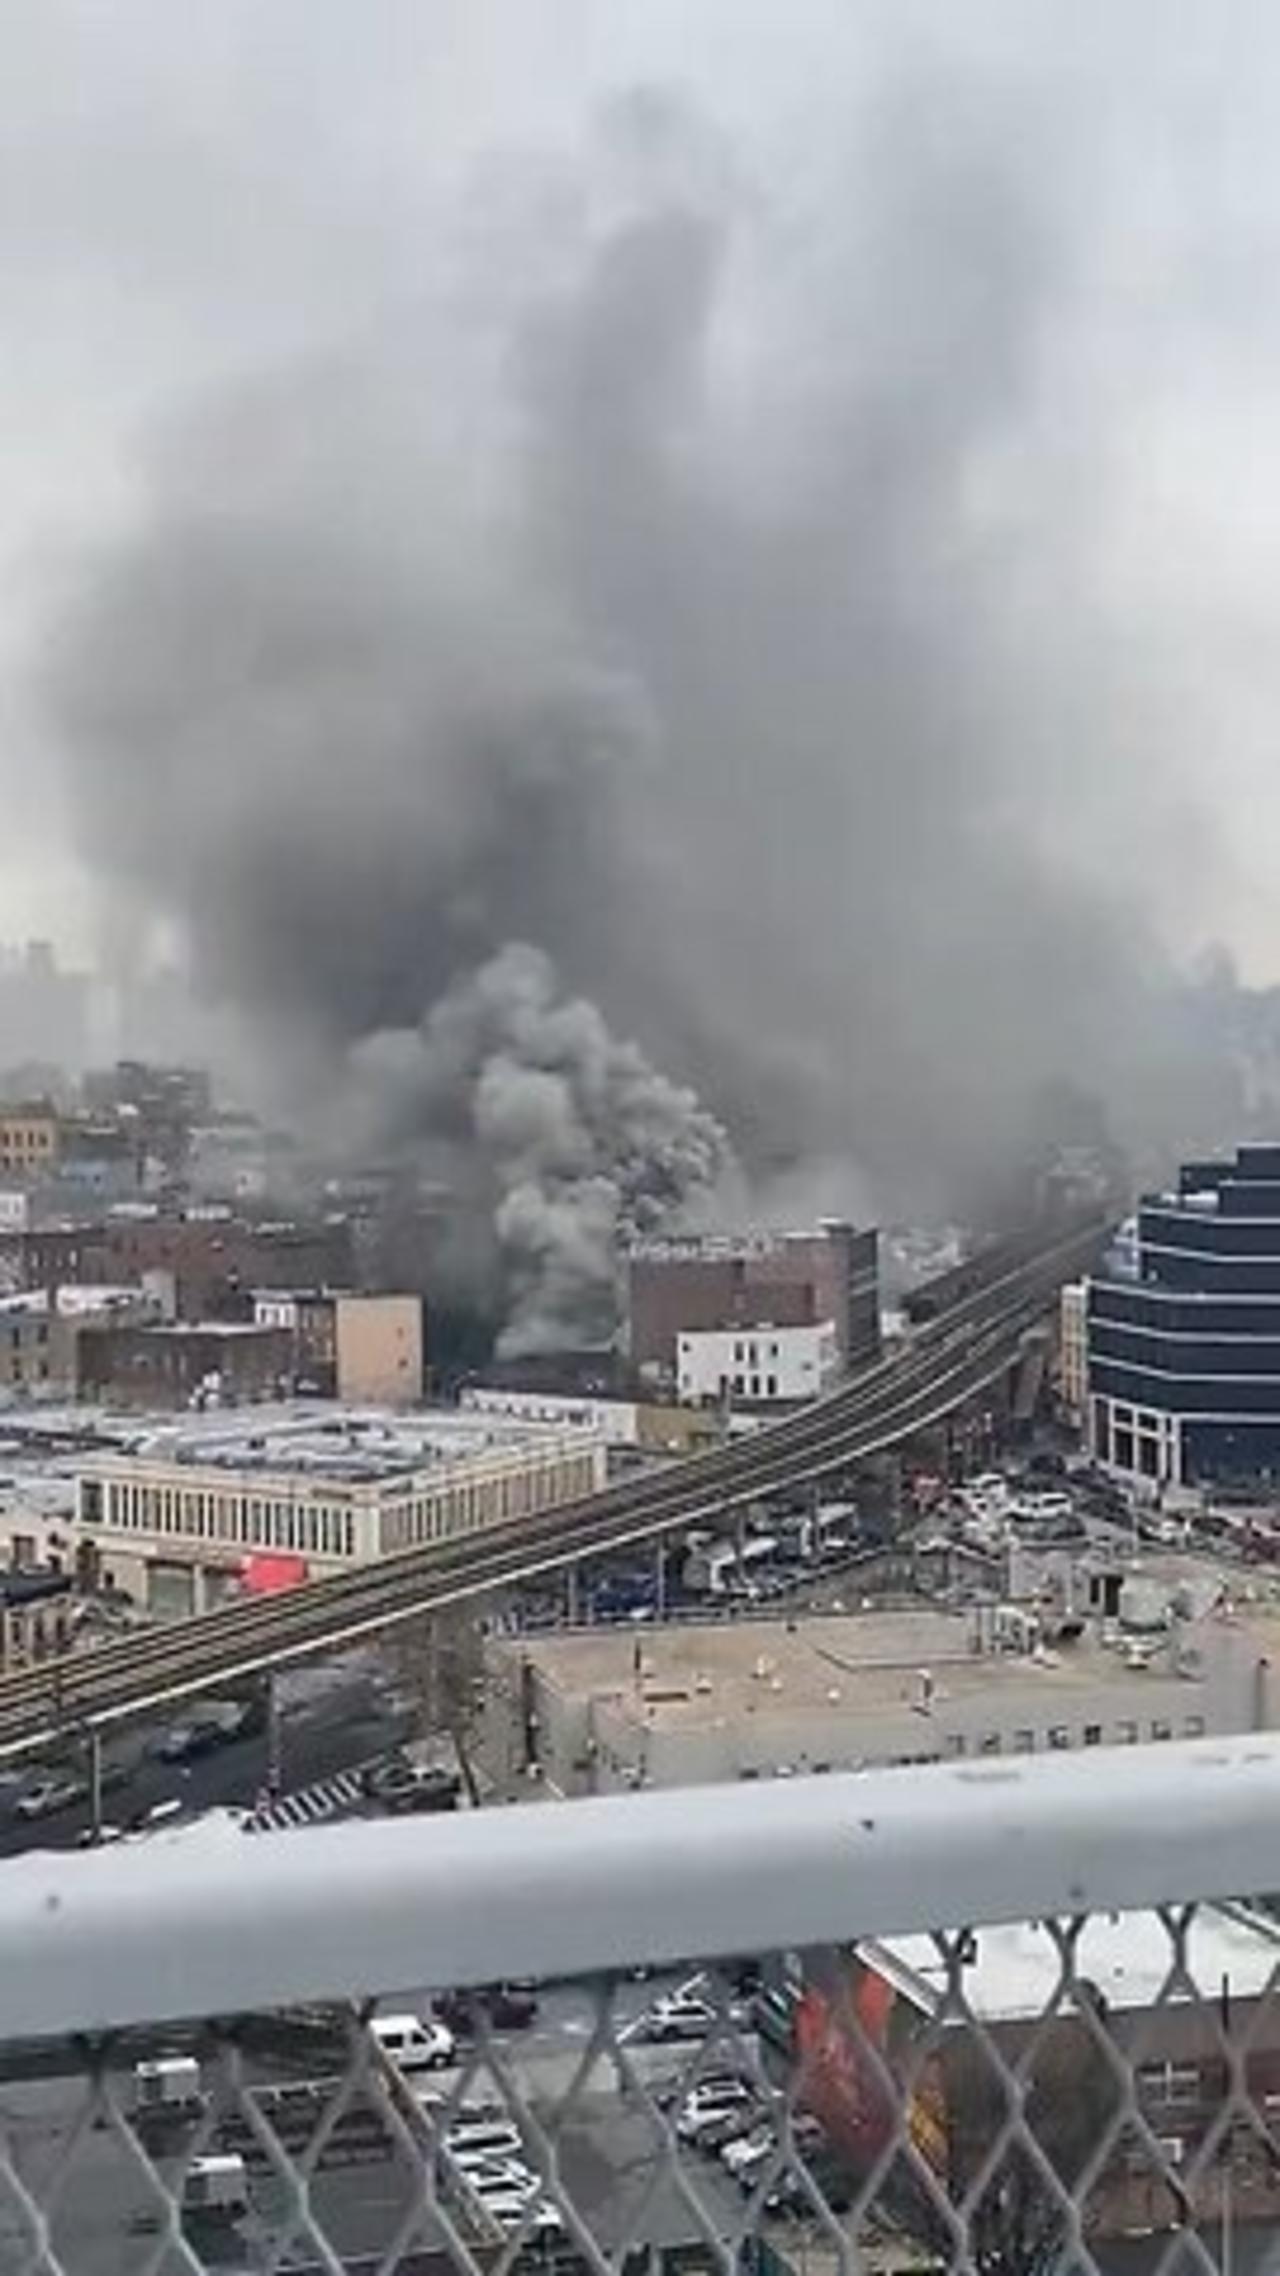 BREAKING: Massive smoke after fire reported at Lumber Storage in Williamsburg, Brooklyn